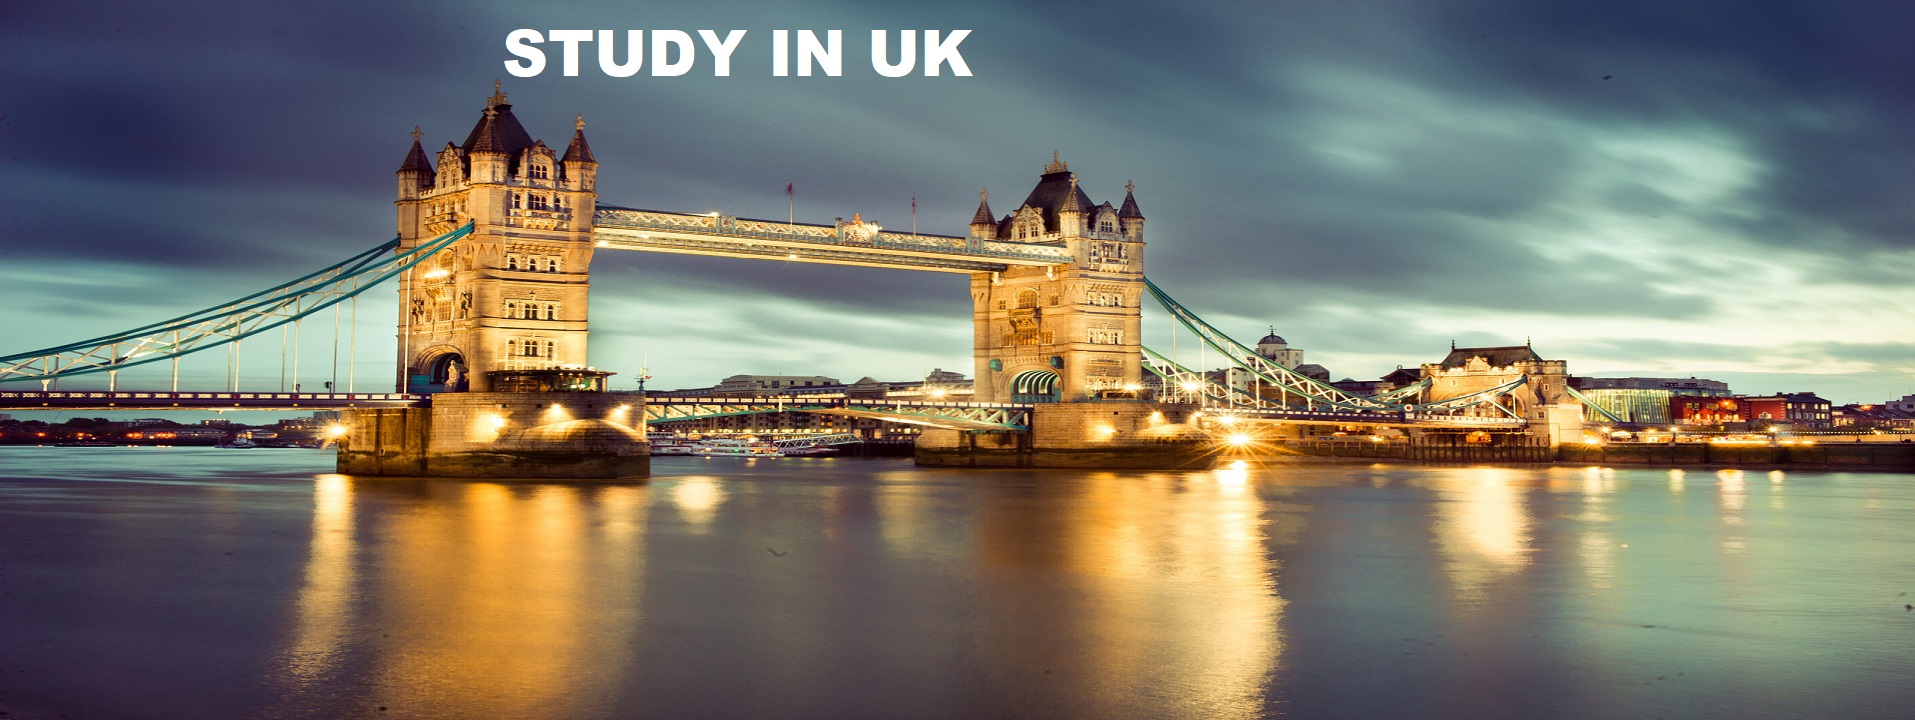 a study in UK from India | Want to Study In UK | Study Options in the UK for Indian students | study in UK from India cost | Cost Of Living in United Kingdom | study abroad UK university | study abroad opportunities in UK | Study Abroad in England | Study Abroad in the United Kingdom | Study and work outside the UK